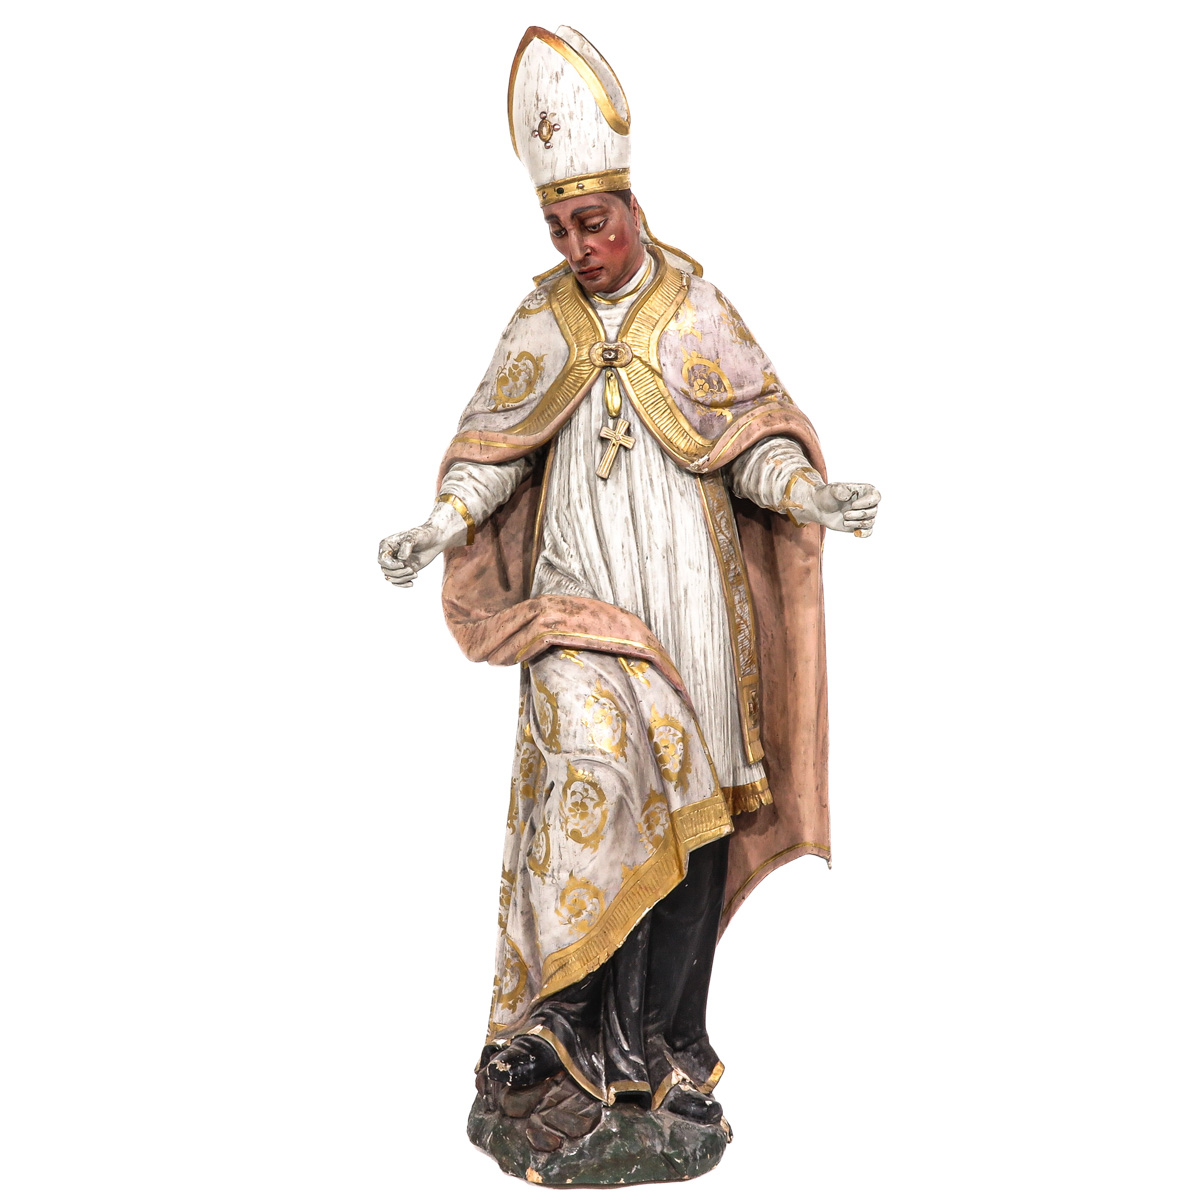 A Religious Wood Sculpture of a Pope